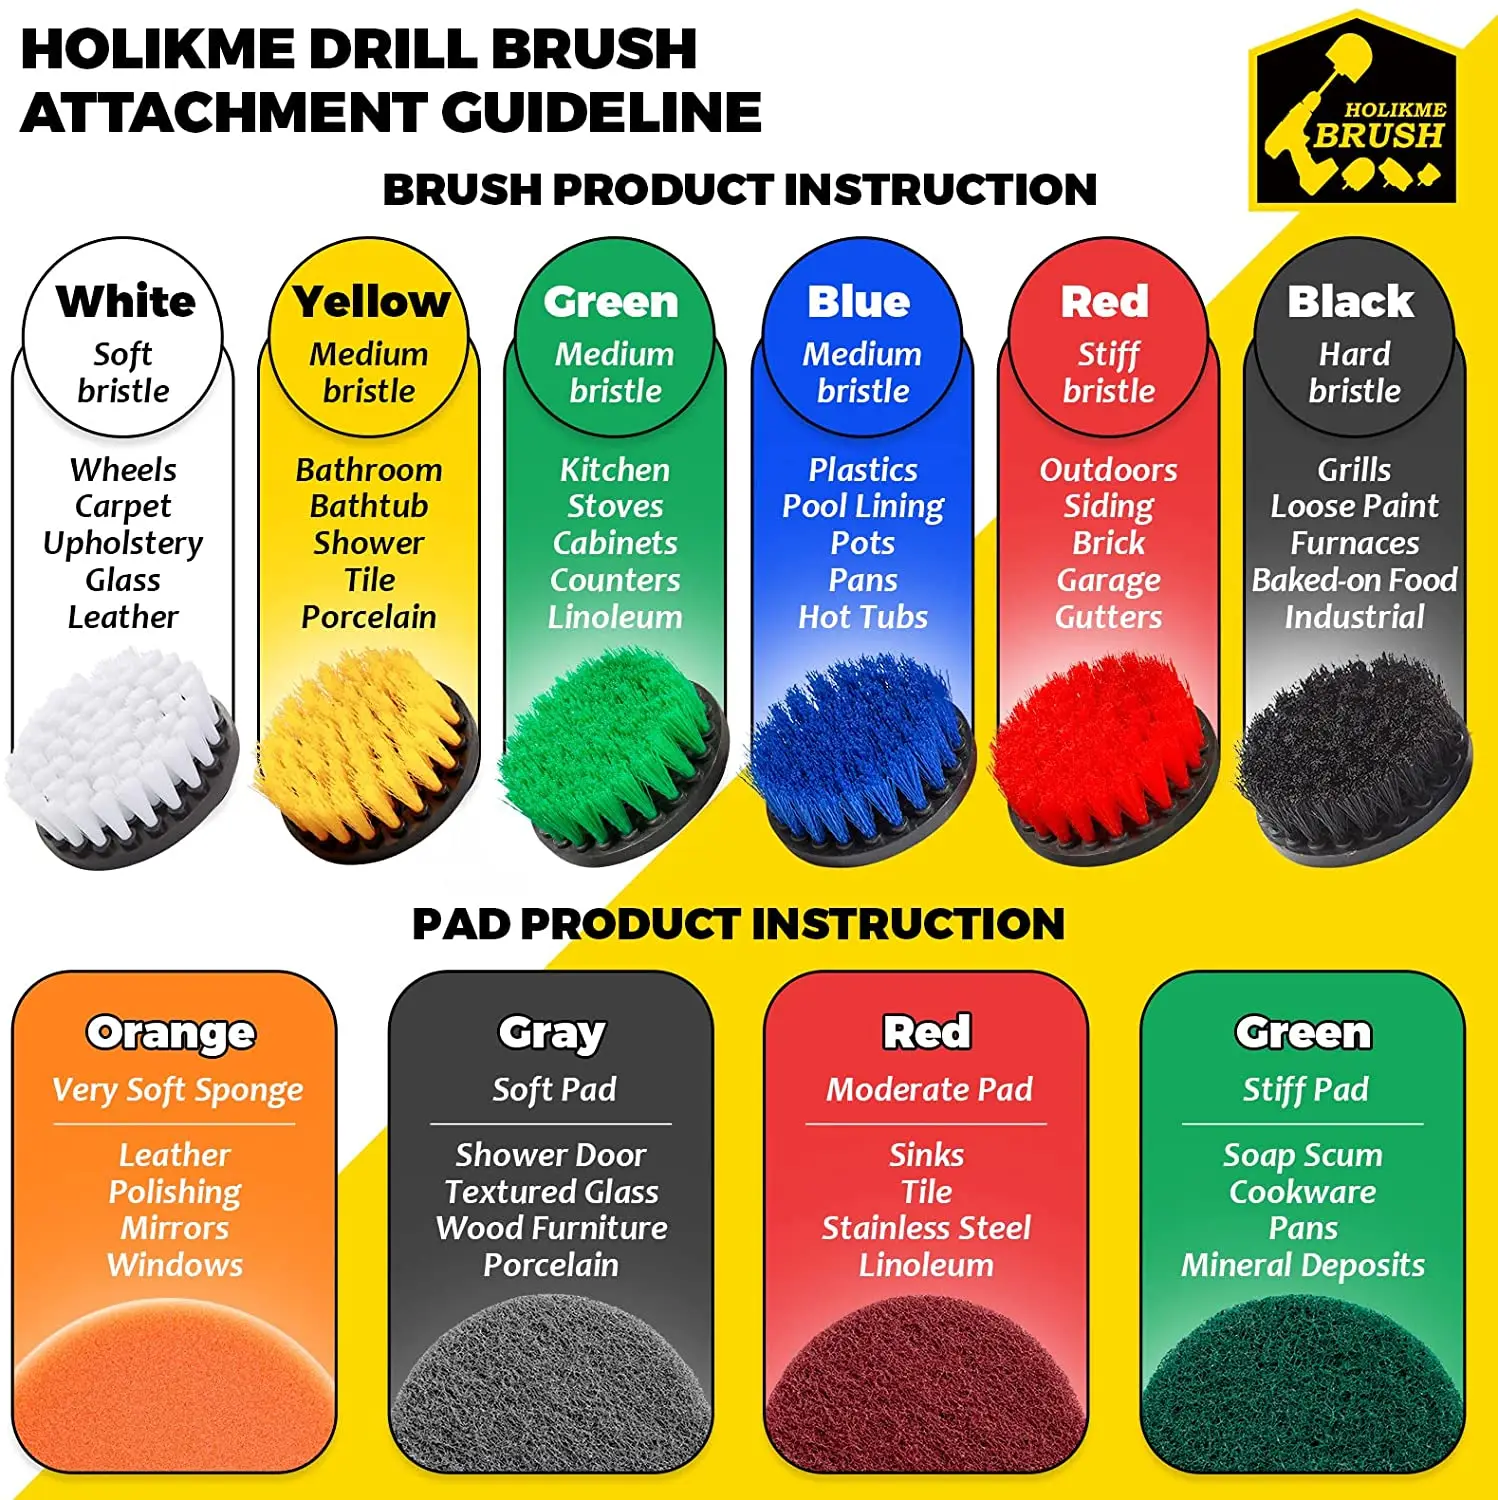 https://ae01.alicdn.com/kf/S2e1a6bf092494ac9896b0fbd0eaa4a7am/38-Pack-Drill-Brush-Attachments-Set-Scrub-Pads-and-Sponge-Power-Scrubber-Brush-with-Extend-Long.jpg